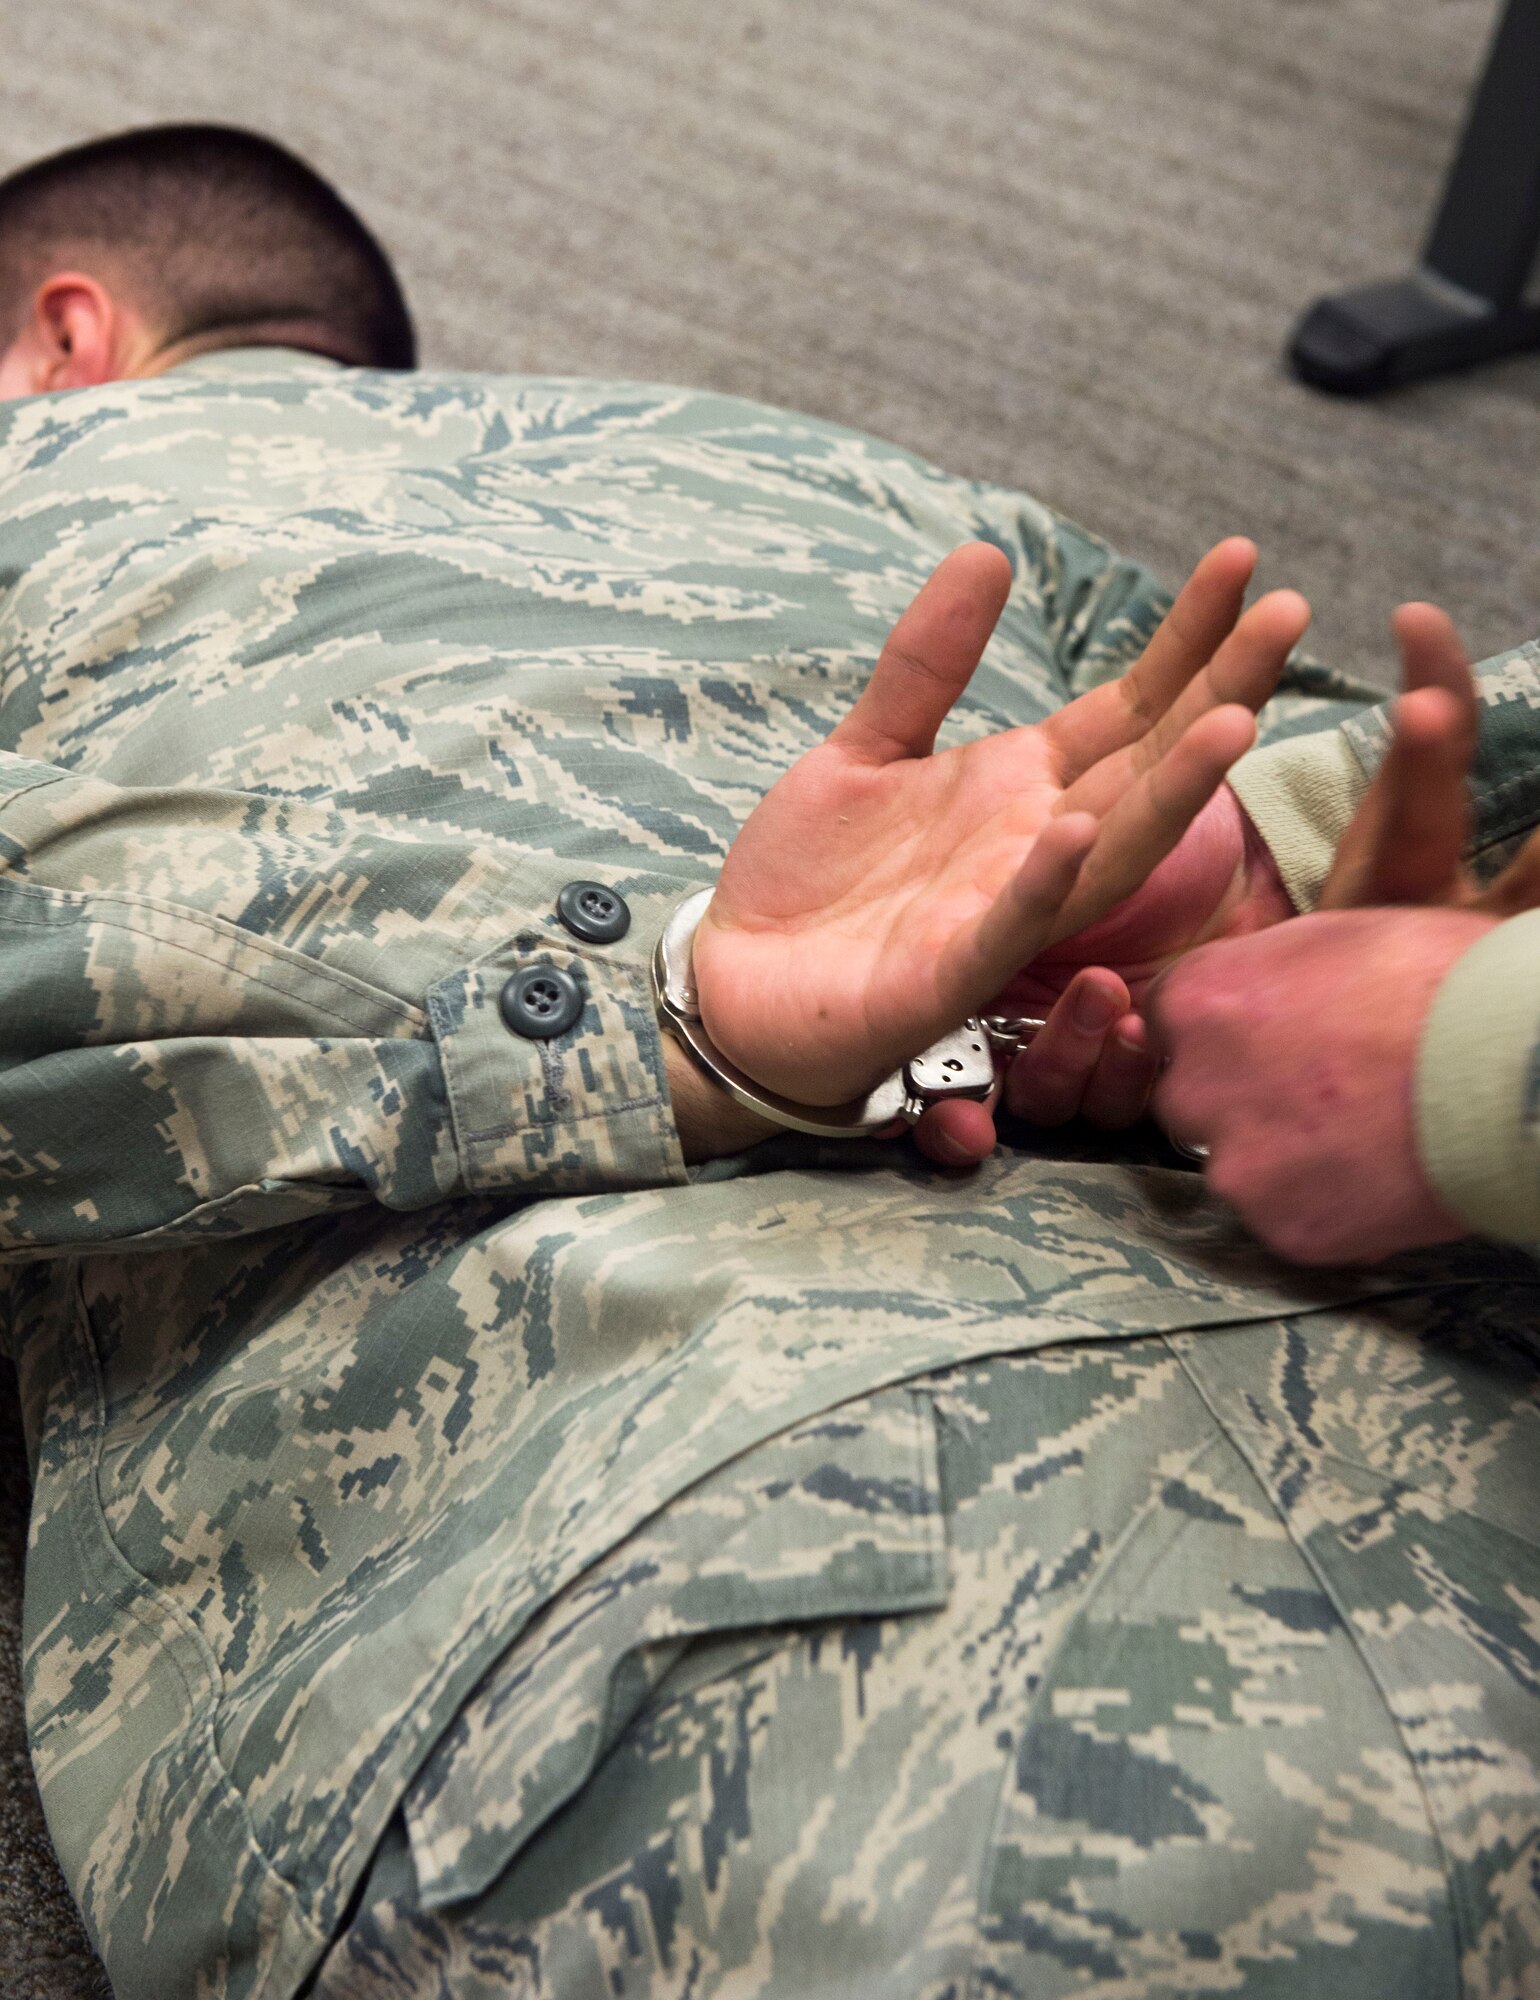 Airmen with the 1st Special Operations Security Forces Squadron practice apprehending suspects during handcuff and search training at the 1st SOSFS, Hurlburt Field, Fla., Feb. 10, 2016. Security Forces personnel must ensure they thoroughly follow the steps taught in training when checking suspects before placing them in handcuffs. (U.S. Air Force photo by Senior Airman Krystal M. Garrett)